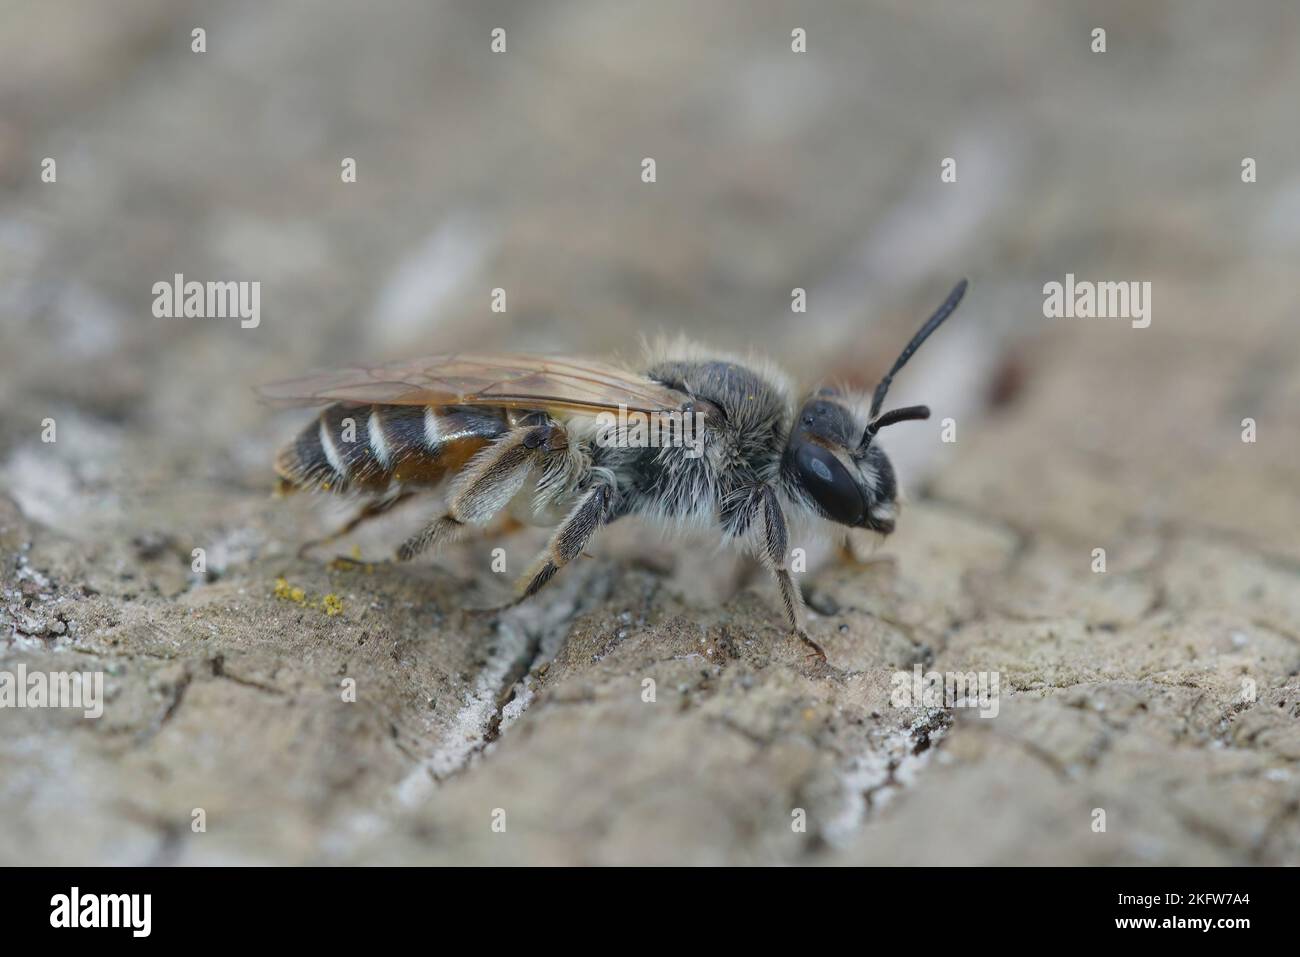 Detailed closeup on a female red bellied miner mining bee, Andrena vetralis, sitting on wood Stock Photo